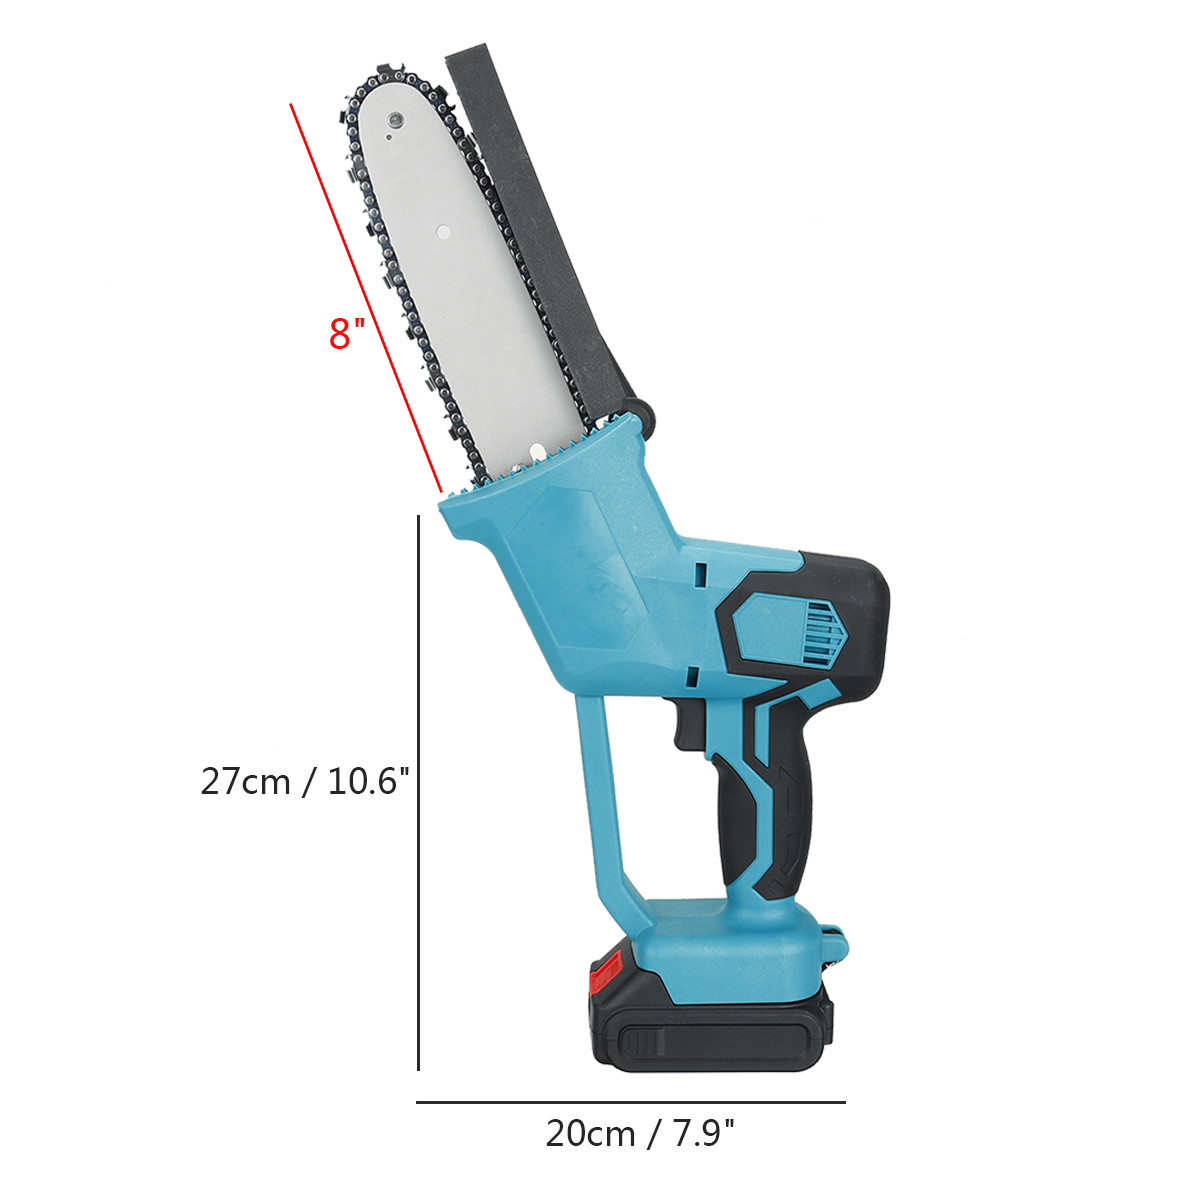 8Inch-21V-Cordless-Electric-Chain-Saw-Mini-Wood-Cutter-1200W-One-Hand-Saws-Woodworking-Tool-W-None12-1860320-11